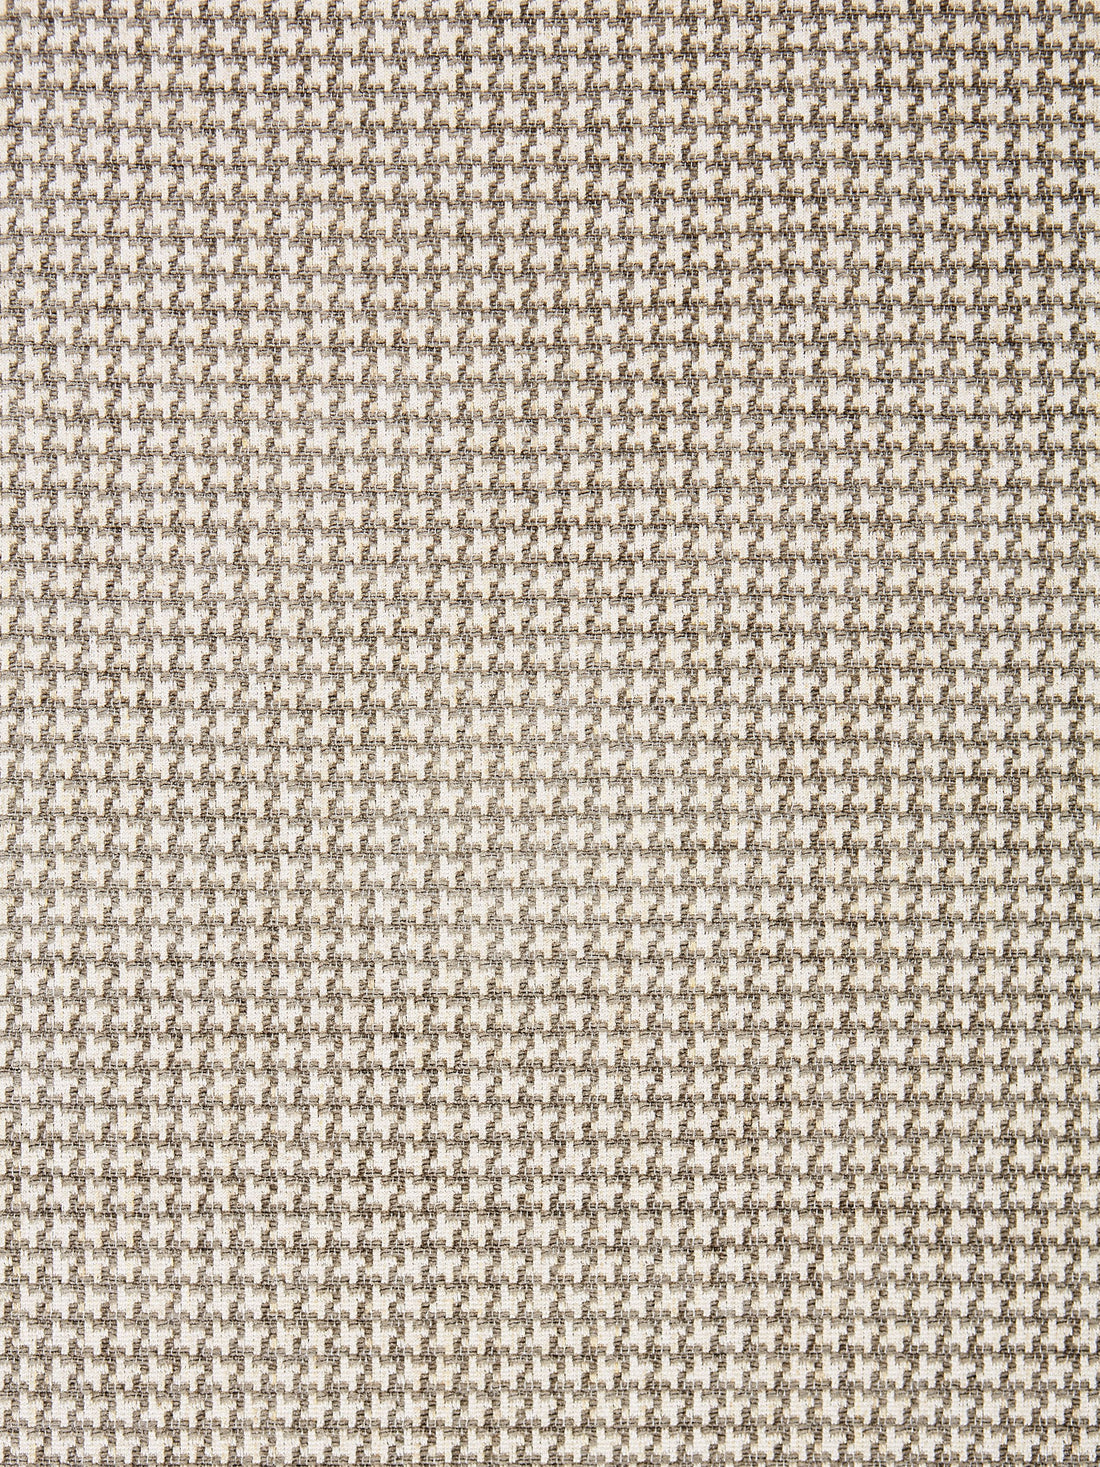 Clyde Houndstooth Weave fabric in fog color - pattern number SC 000327010 - by Scalamandre in the Scalamandre Fabrics Book 1 collection